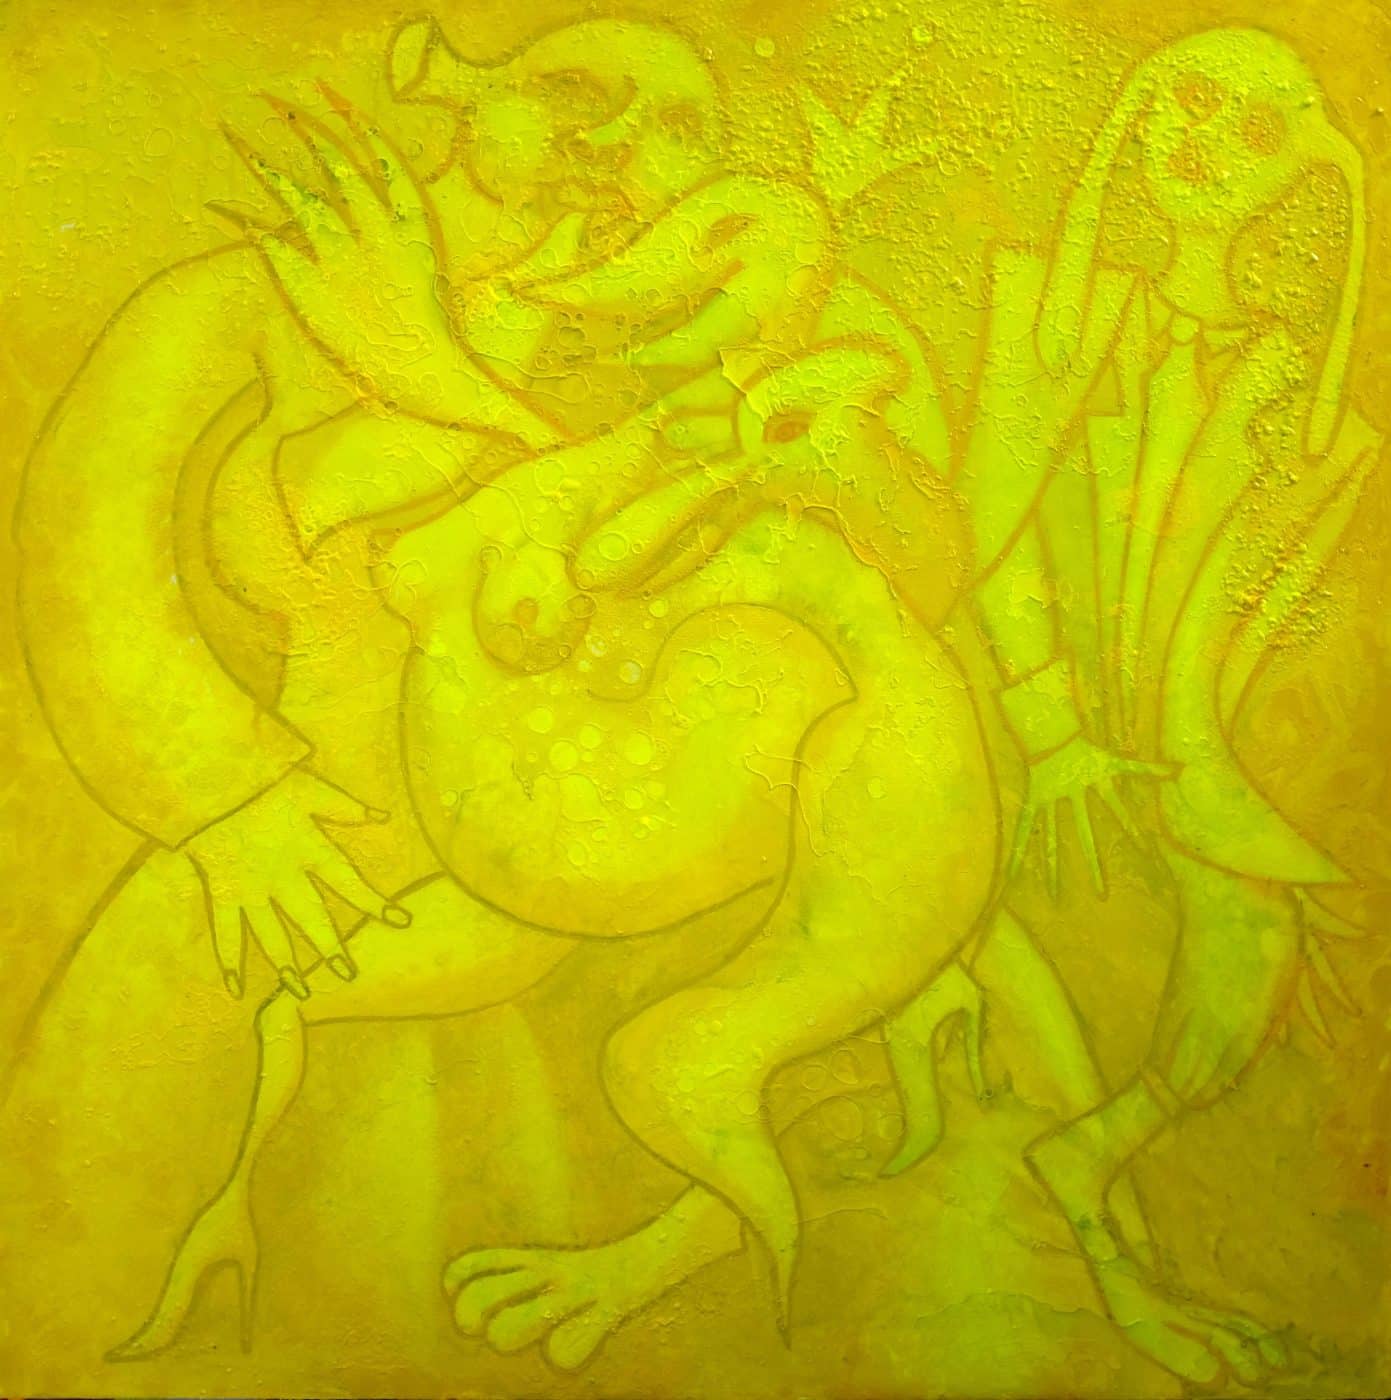 A panel from Anastasia Russa's 2017 work "Microsoft," depicting yellow figures on a yellow background